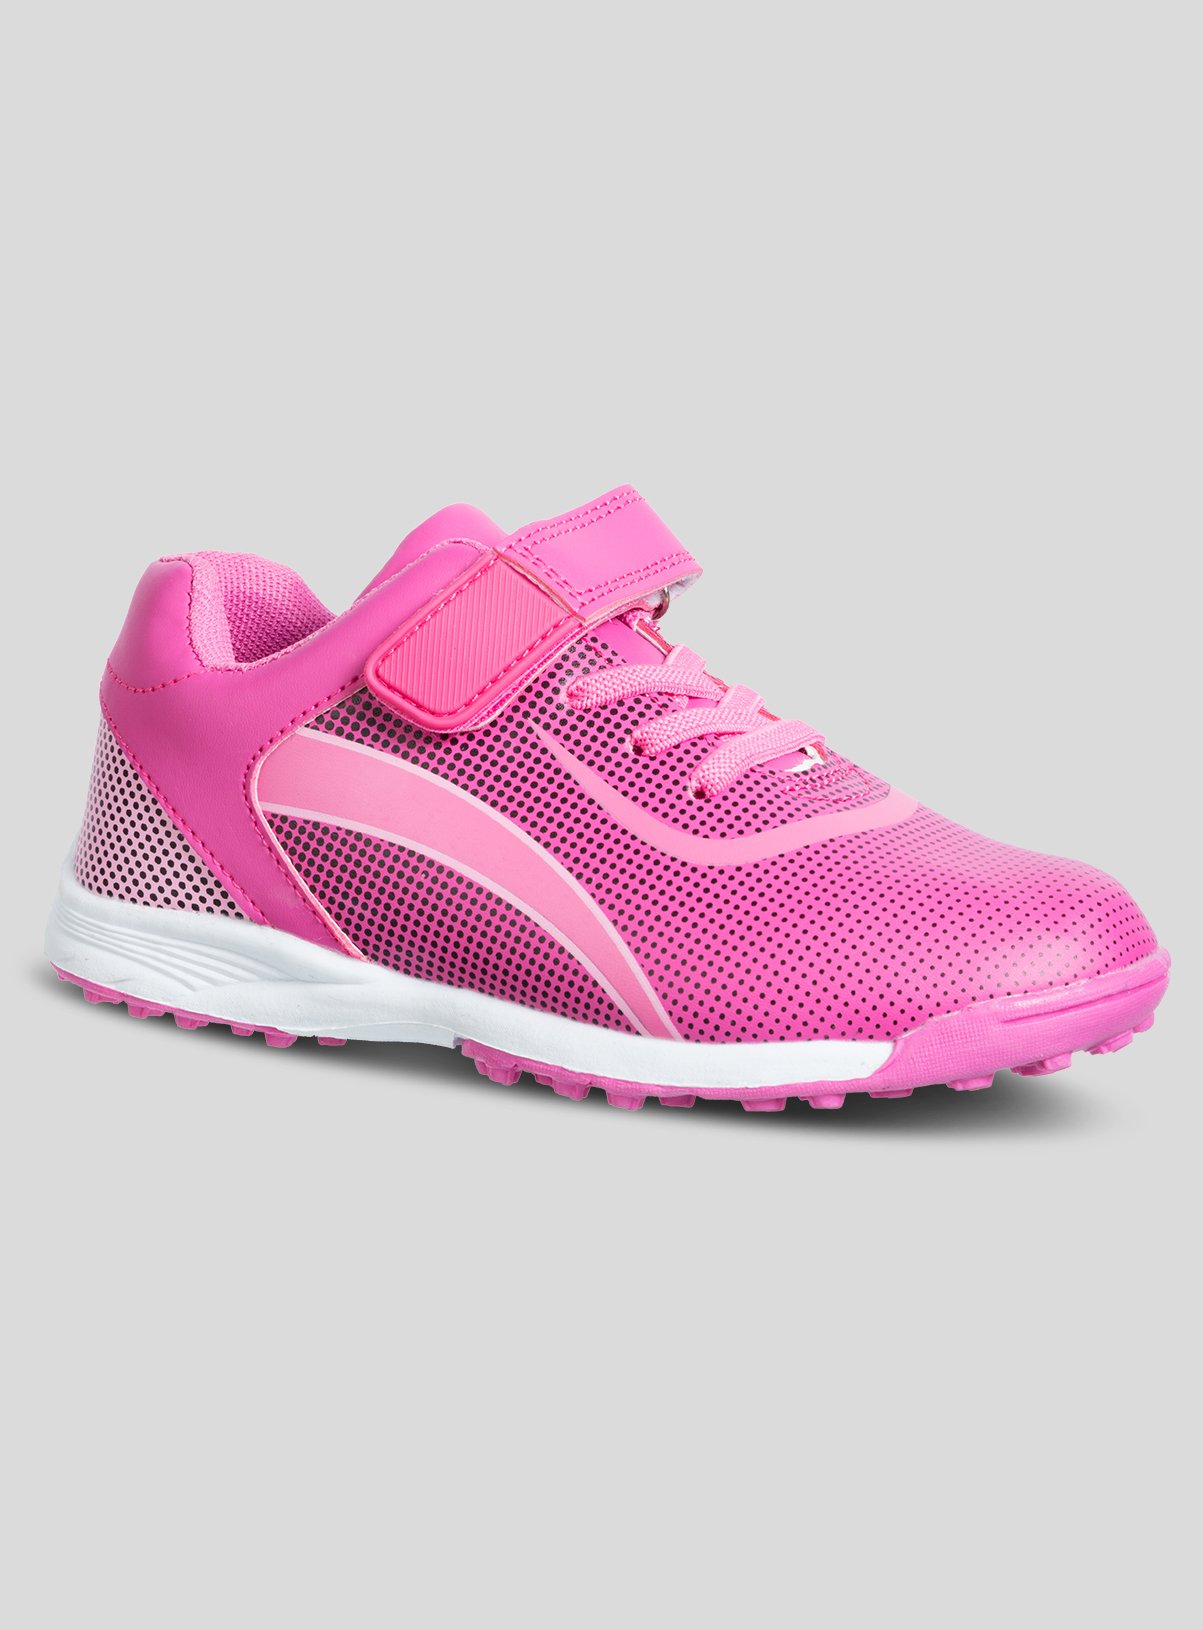 Kids Pink Astro Turf Football Trainers 